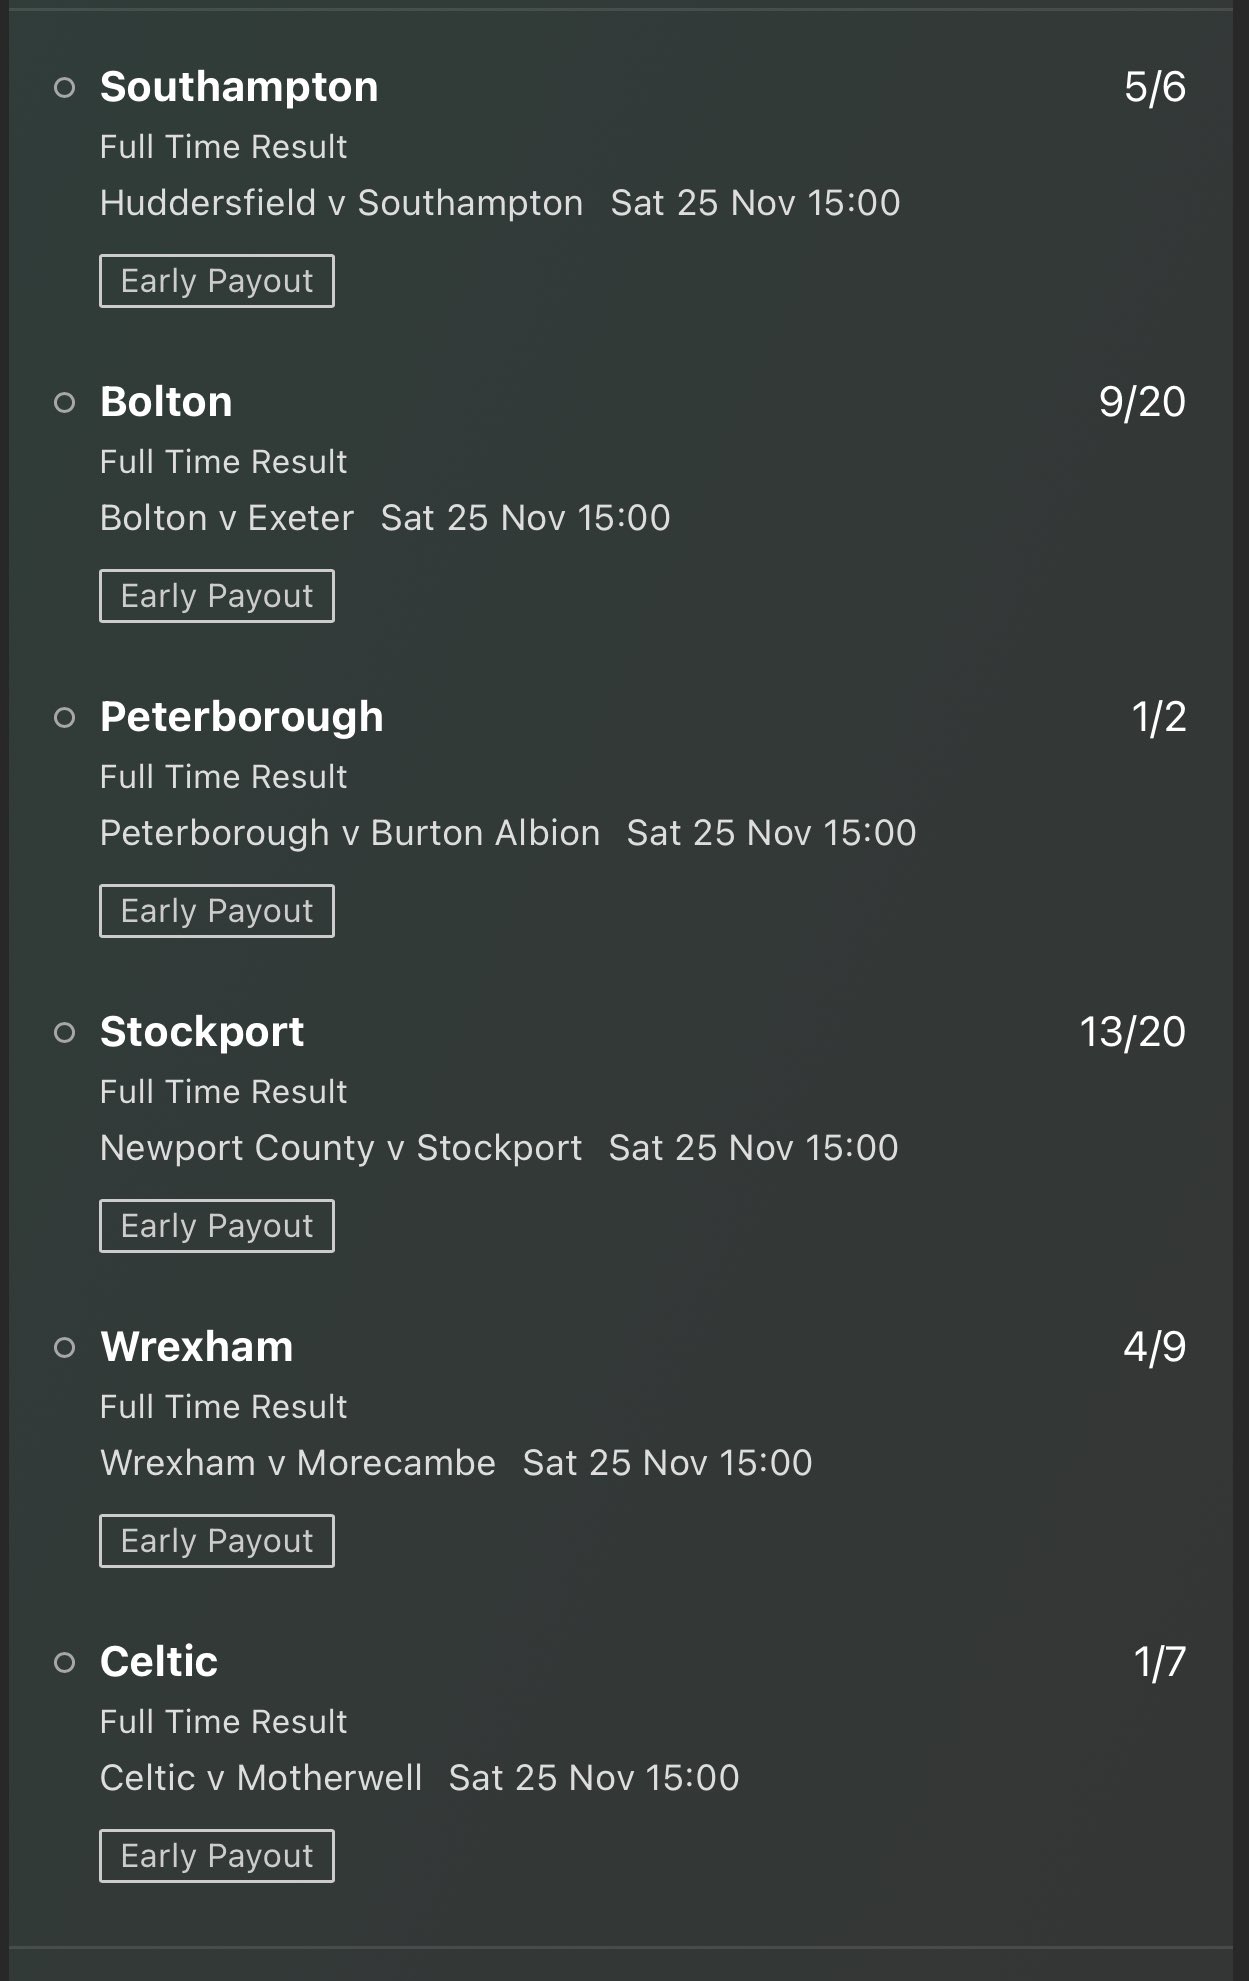 BTTS Tips: 7/1 Acca Saturday 3pm I